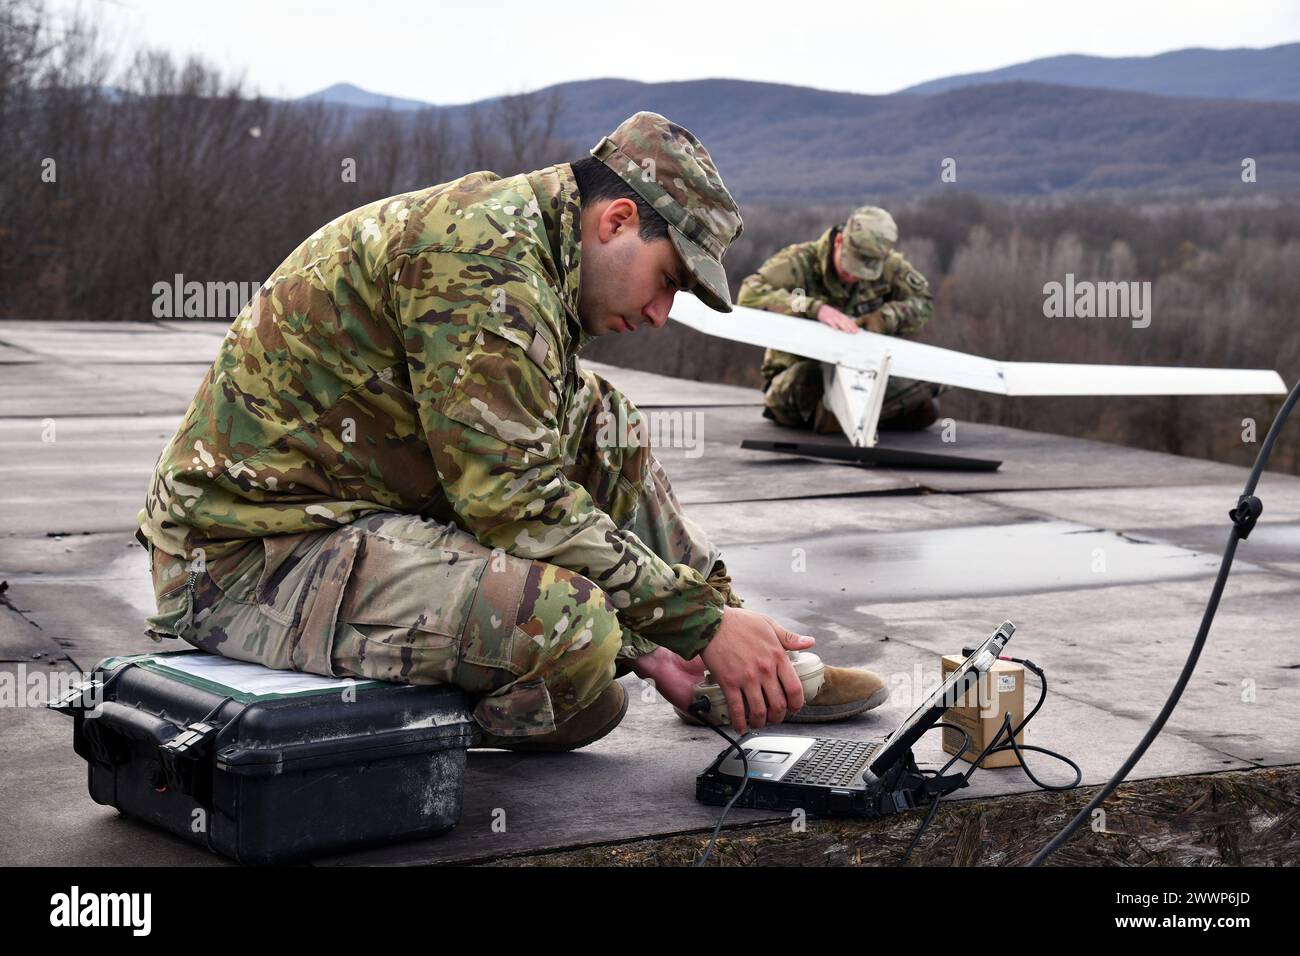 U.S. Army Paratroopers assigned to the 1st Battalion, 503rd Infantry Regiment, 173rd Airborne Brigade, prepare a Puma aviation system during Eagle Ursa exercise at the training range in Slunj, Croatia, Feb. 24, 2024. The 173rd Airborne Brigade is the U.S. Army's Contingency Response Force in Europe, providing rapidly deployable forces to the United States European, African, and Central Command areas of responsibility. Forward deployed across Italy and Germany, the brigade routinely trains alongside NATO allies and partners to build partnerships and strengthen the alliance.  Army Stock Photo